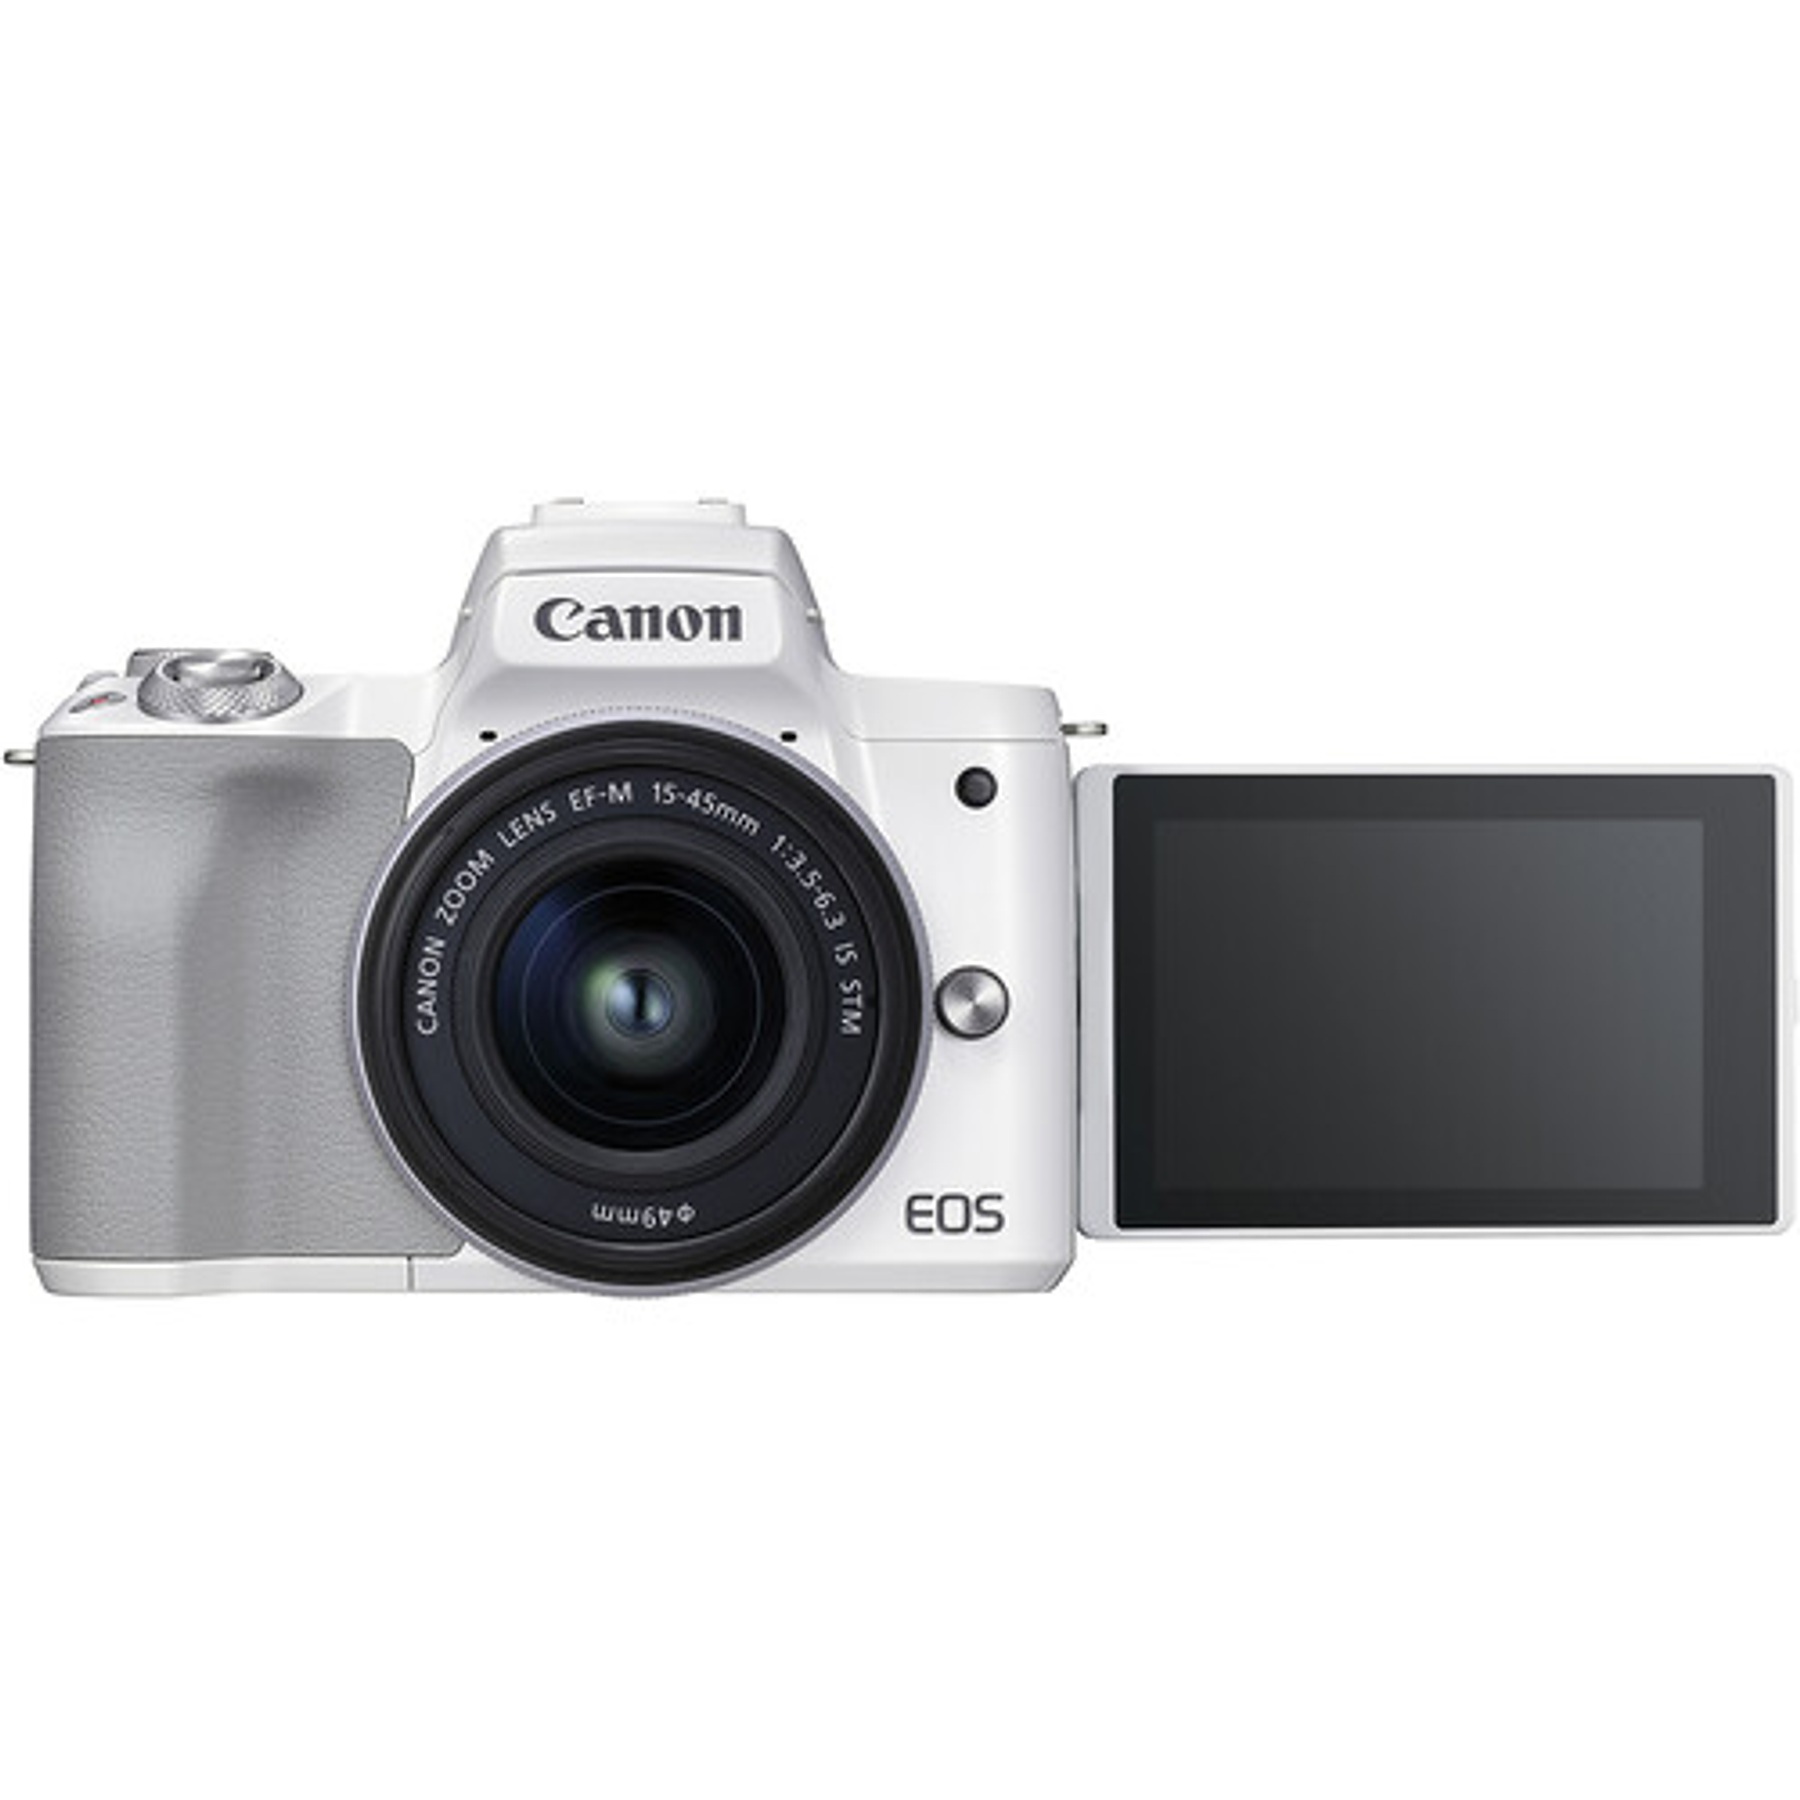 Canon EOS M50 Mark II Blanca + EF-M 15-45mm f/3.5-6.3 IS STM + EF-M 55-200mm f/4.5-6.3 IS STM